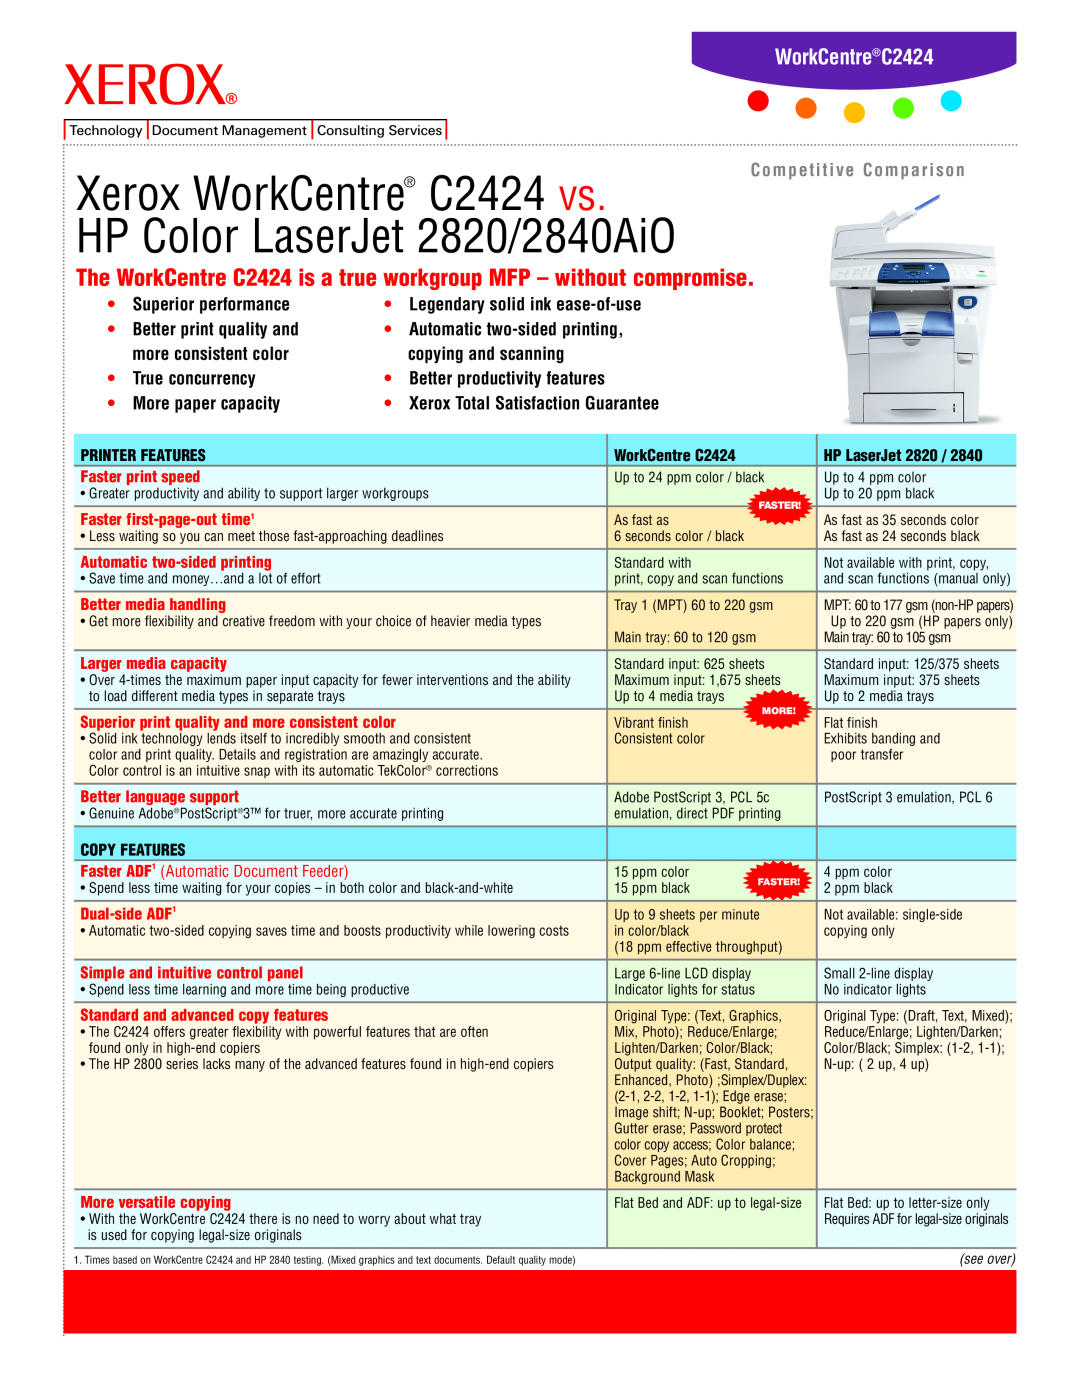 Xerox C2424 setup guide Save setup time, Install Options, Install Scanner, Install Duplex Automatic Document Feeder, 10 cm 